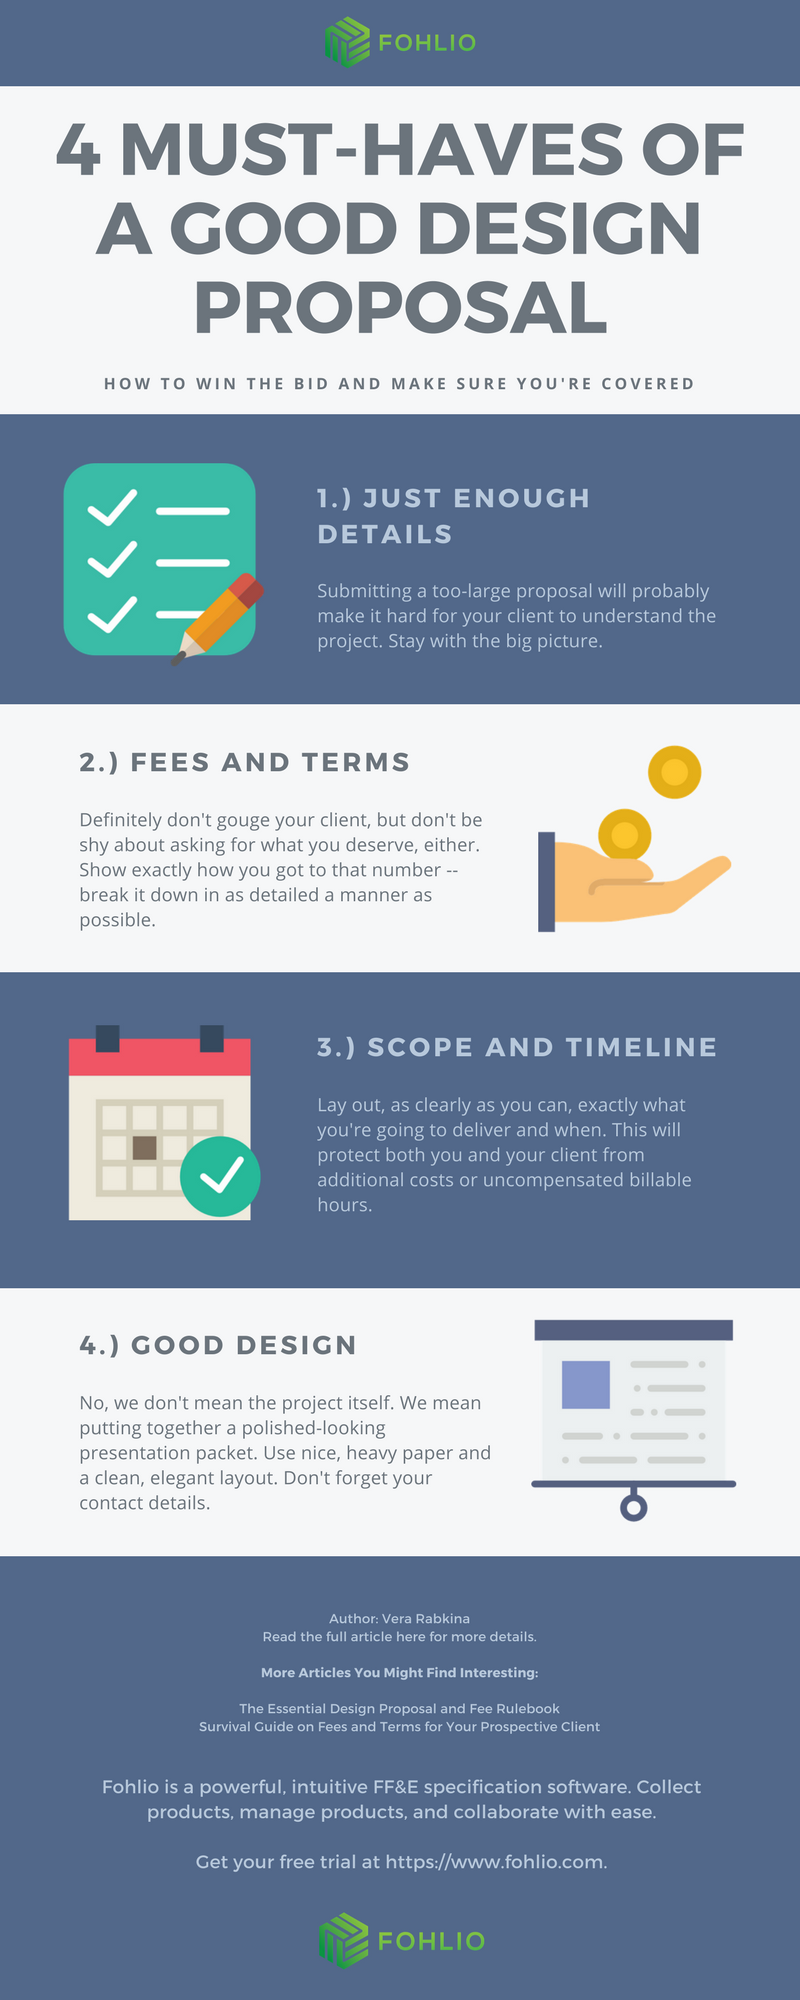 Infographic: 4 Must-Haves of a Good Design Proposal | Fohlio